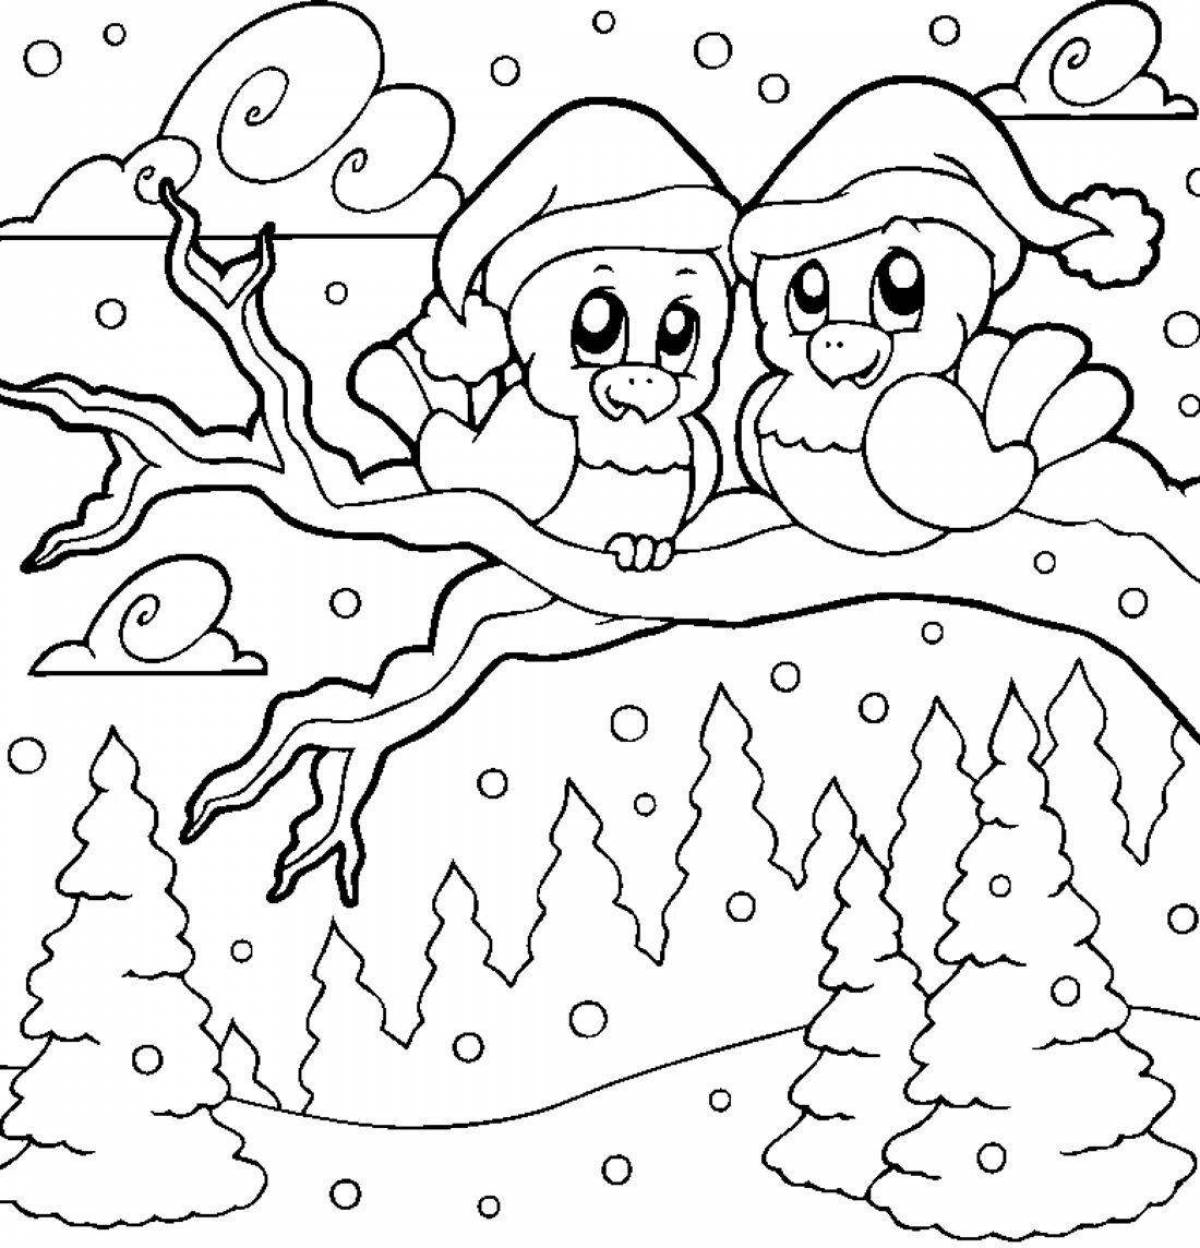 Coloring page inviting winter nature